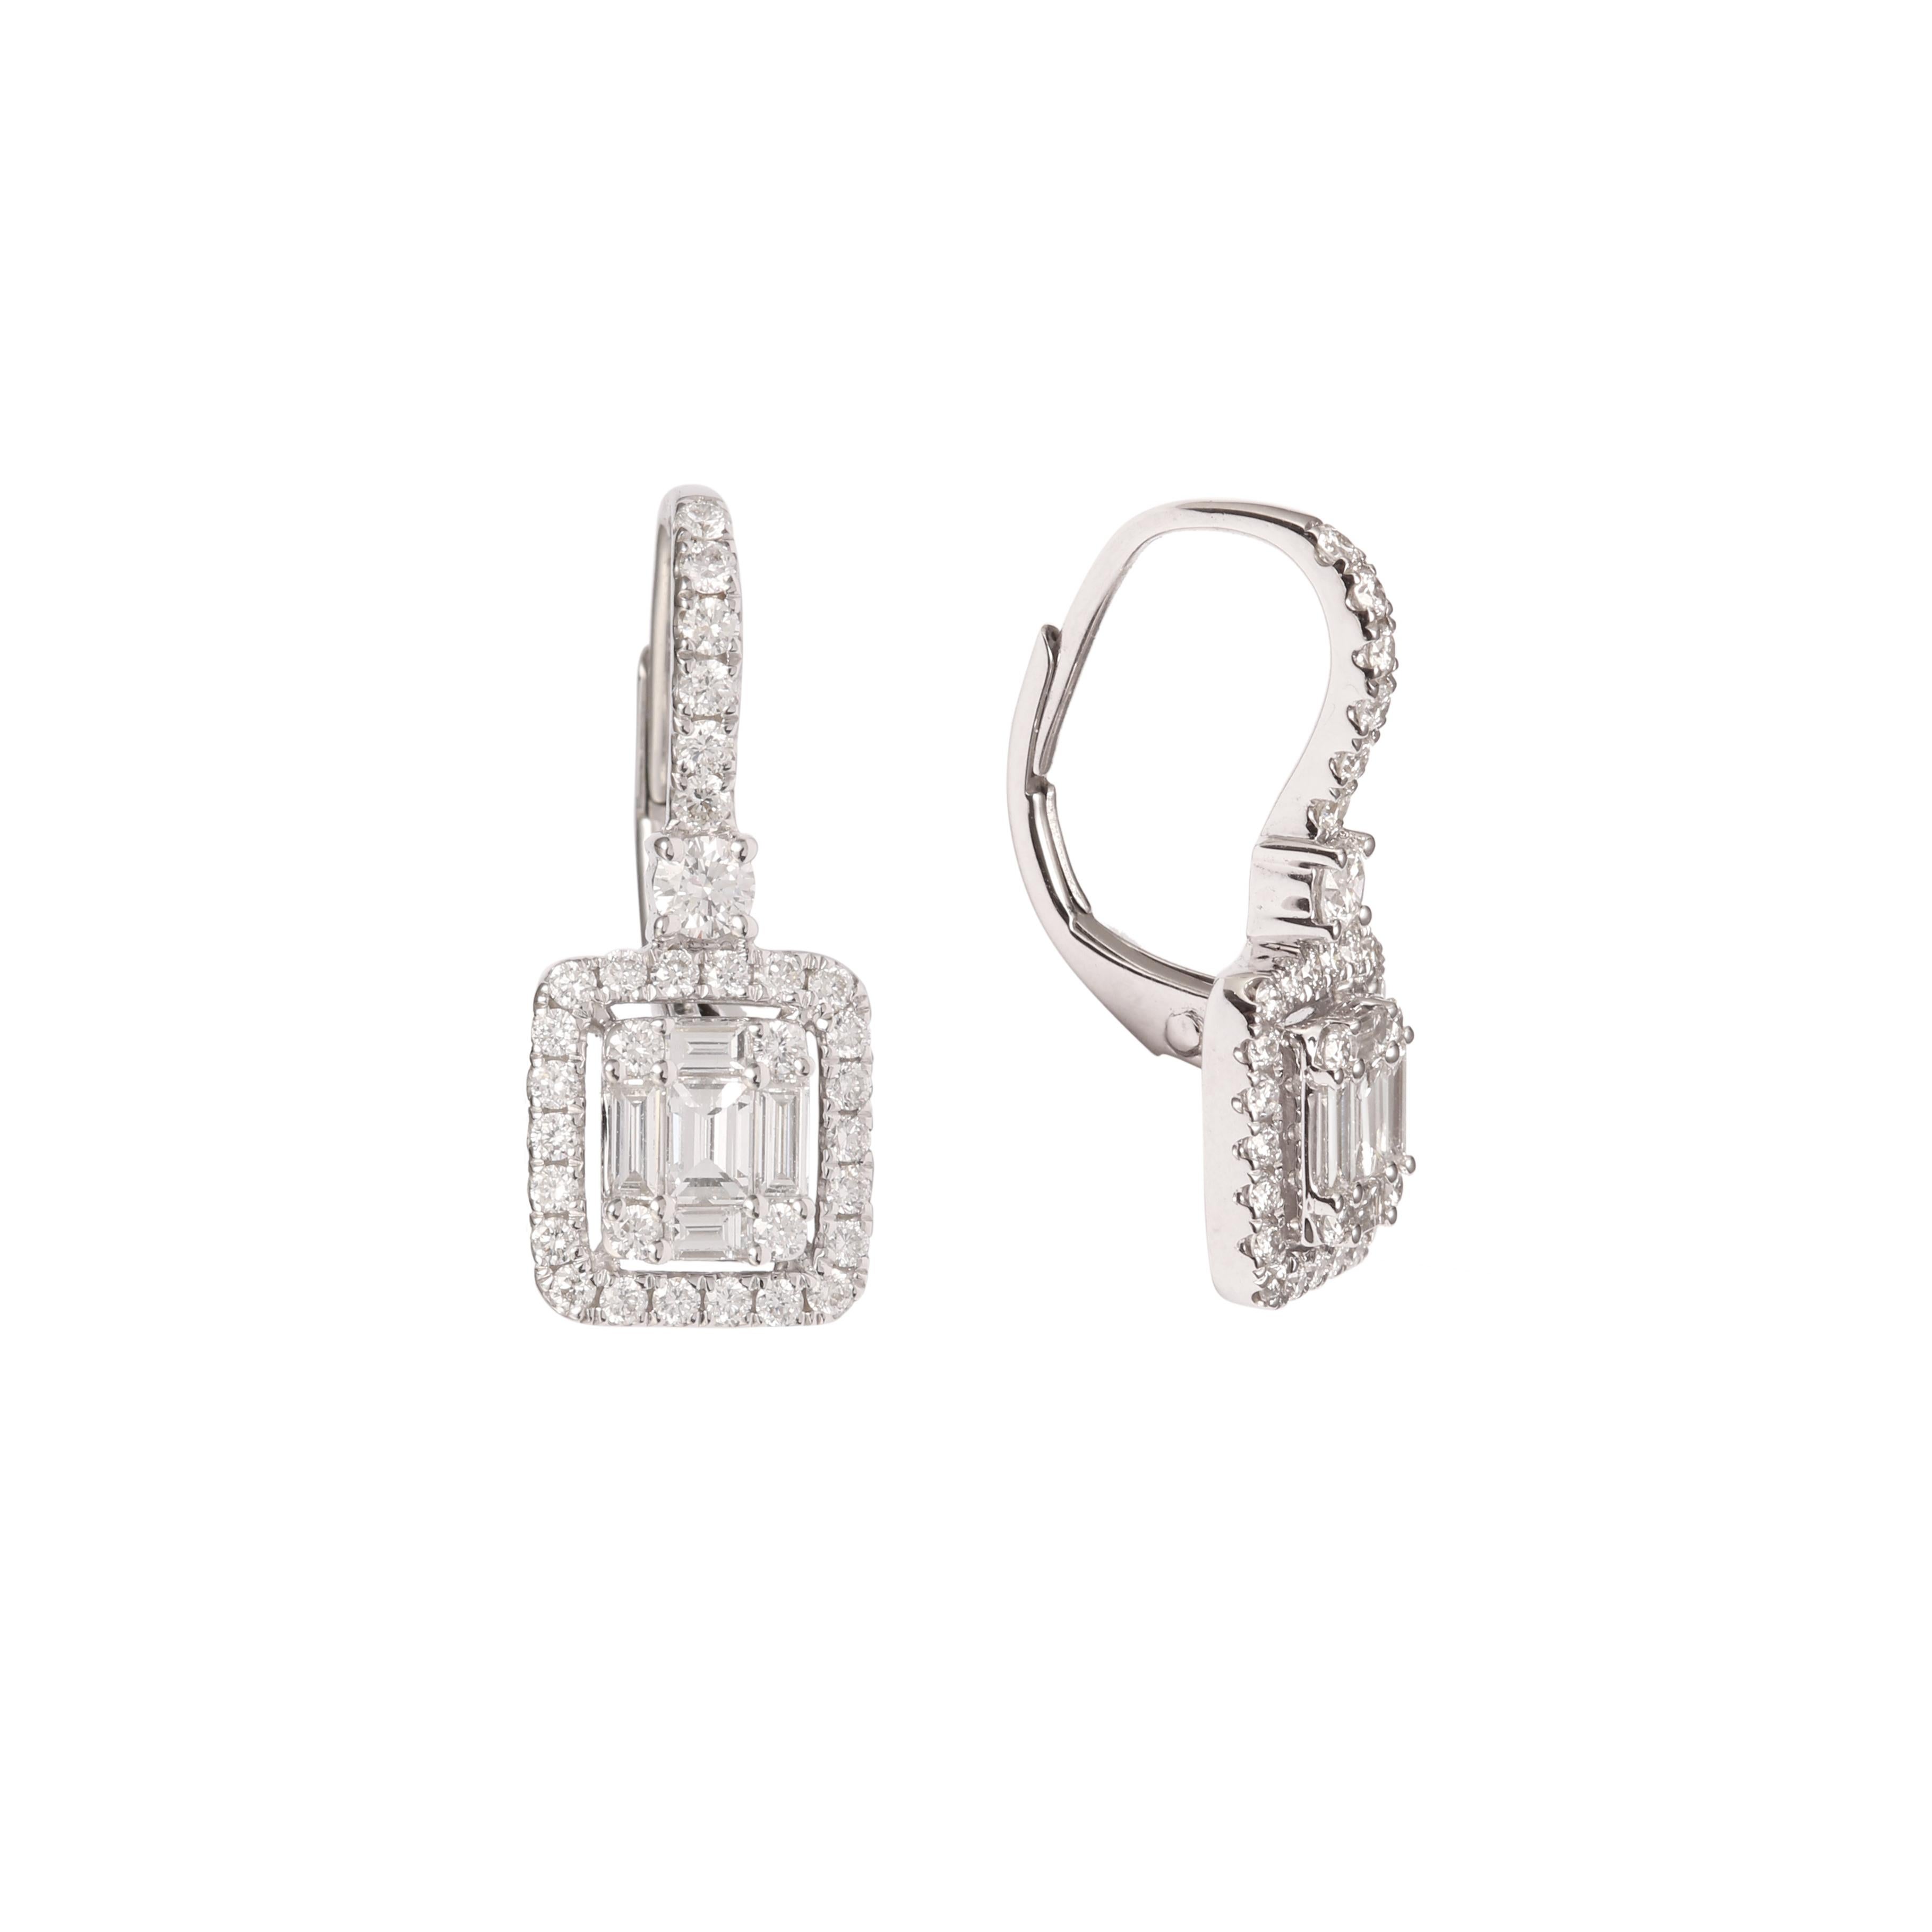 Charming pair of sleeper earrings in white gold set with brilliant and baguette cut diamonds with emerald effect.

Earrings for pierced ears.

Total weight of diamonds : 0.88 carats

Dimensions : 8.98 x 8.31 x 4.57 mm (0.353 x 0.327 x 0.180 inch)